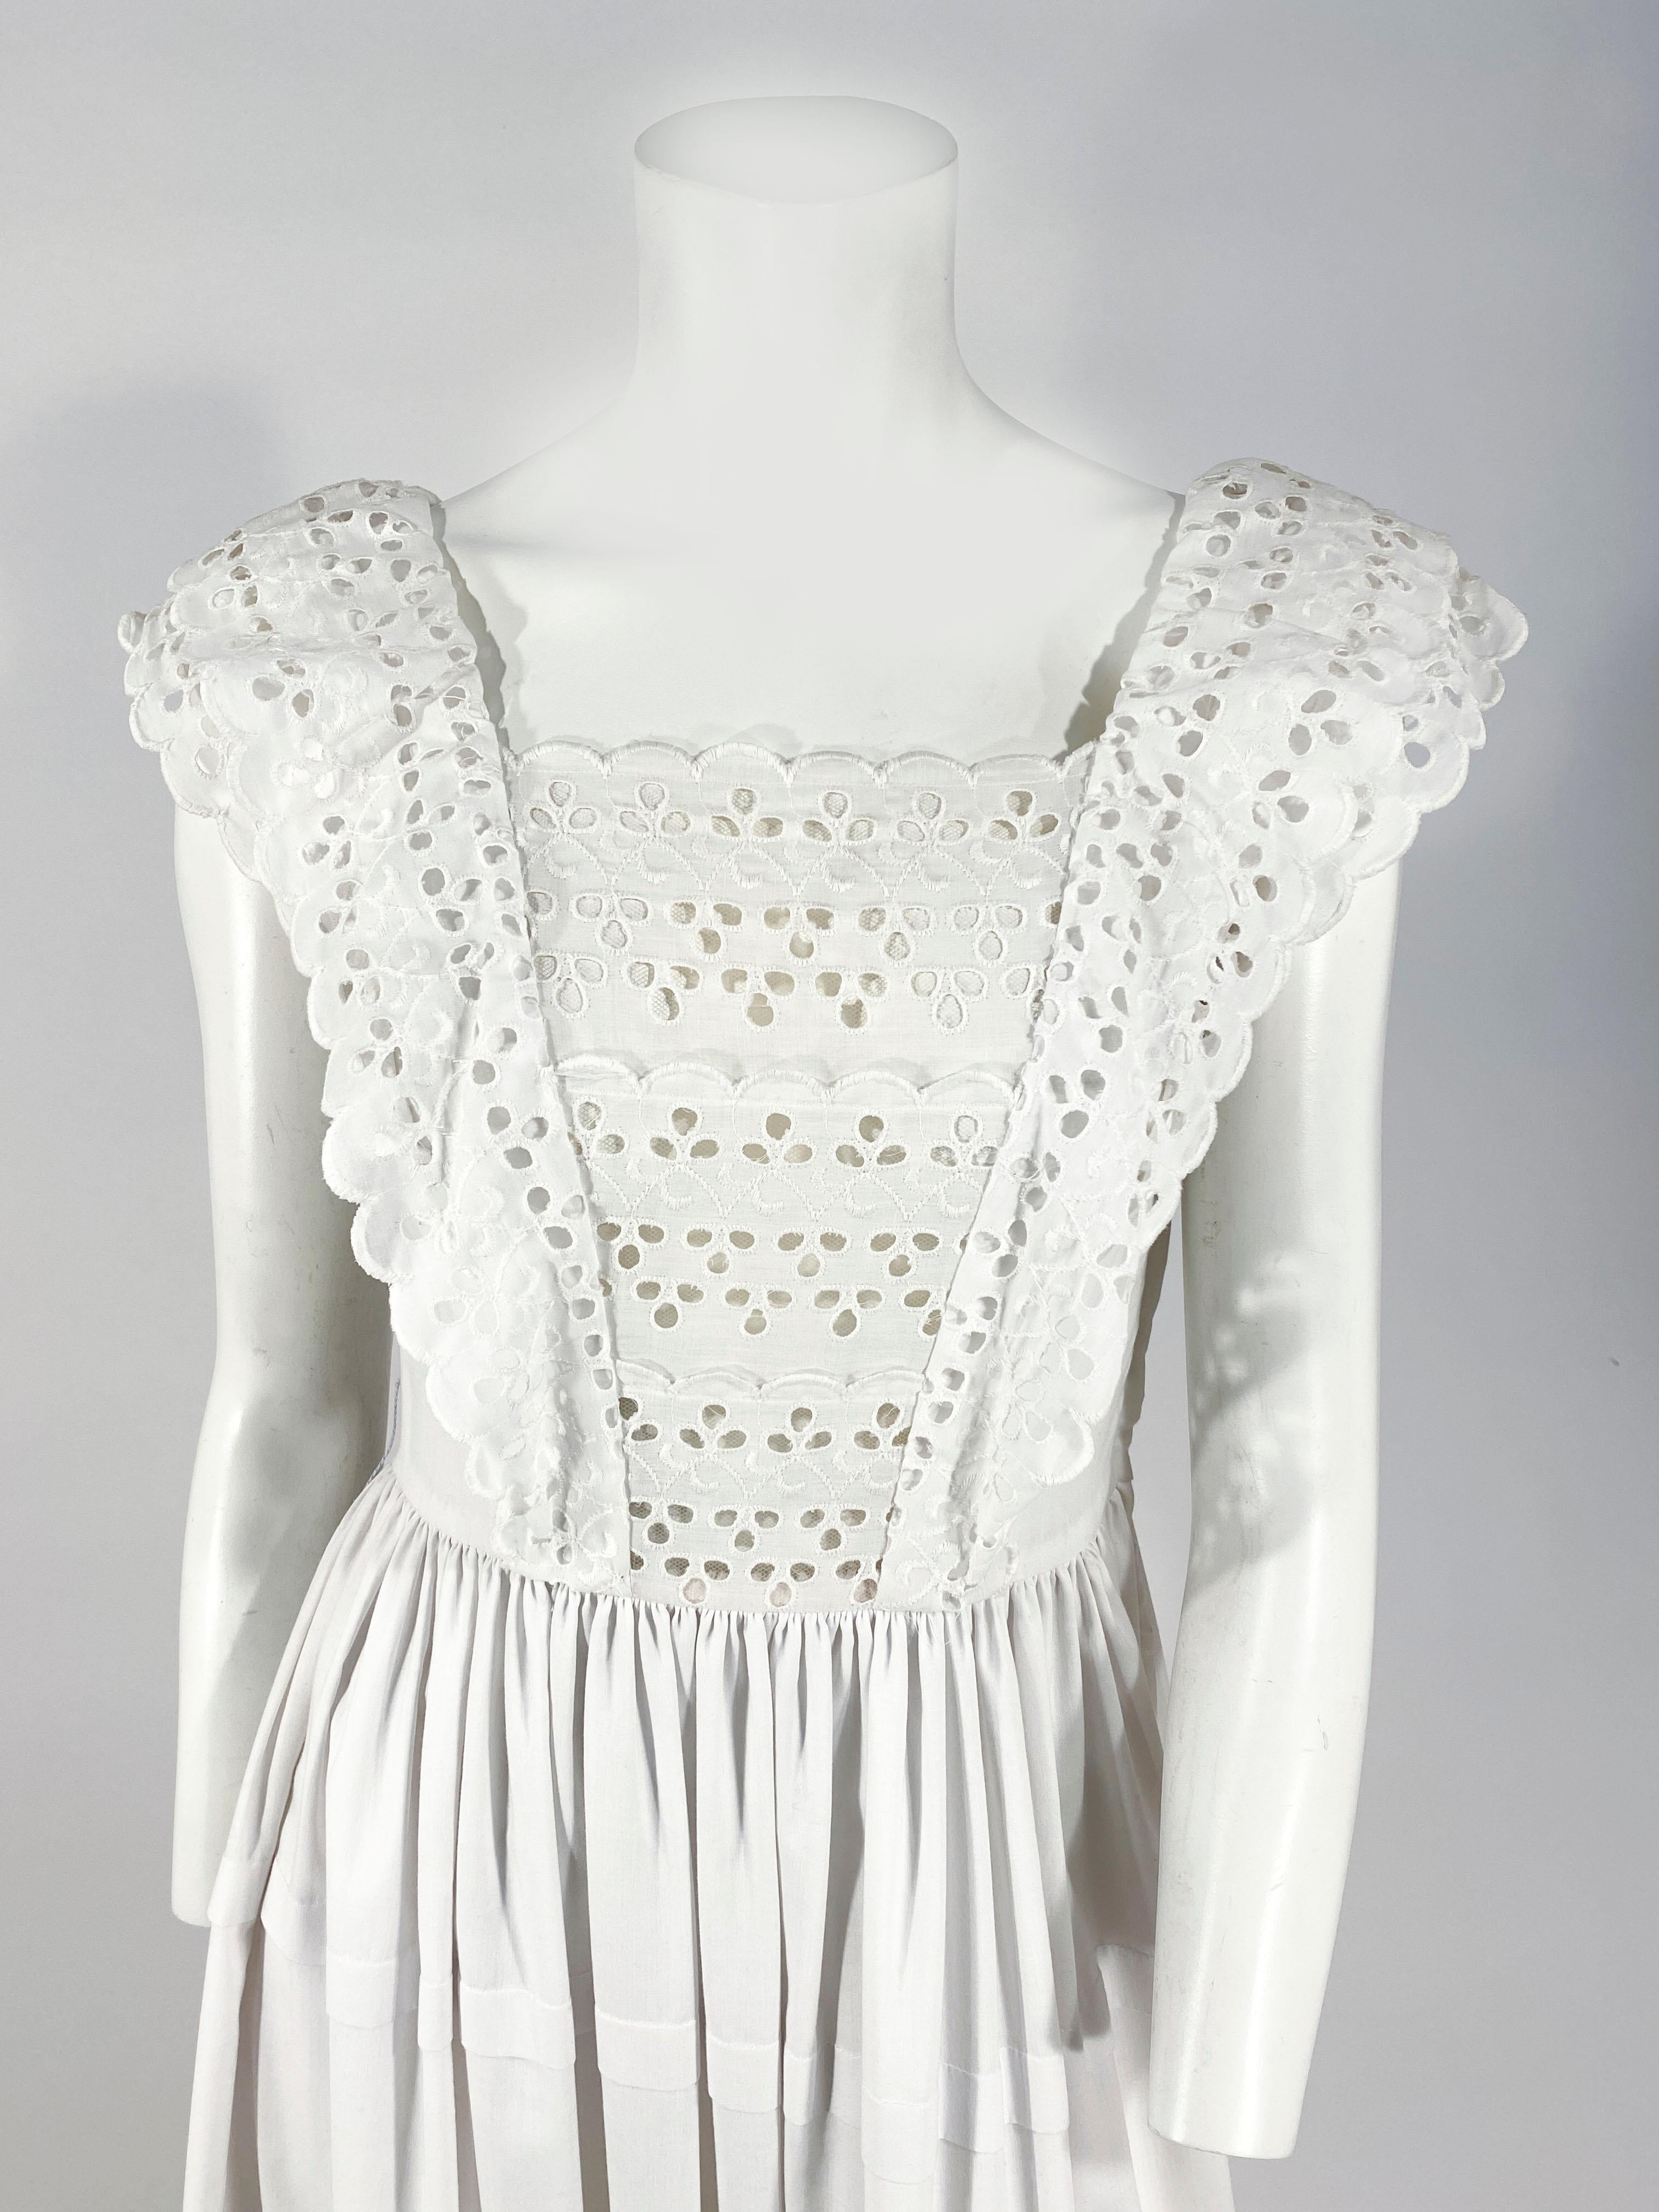 1970s white cotton cottage dress with eyelet lace ruffles along an applied pinafore silhouette and up over the shoulders. The skirt has a wide layered ruffle hem and tiers of pleats. The bodice has a hidden side zipper closure. 